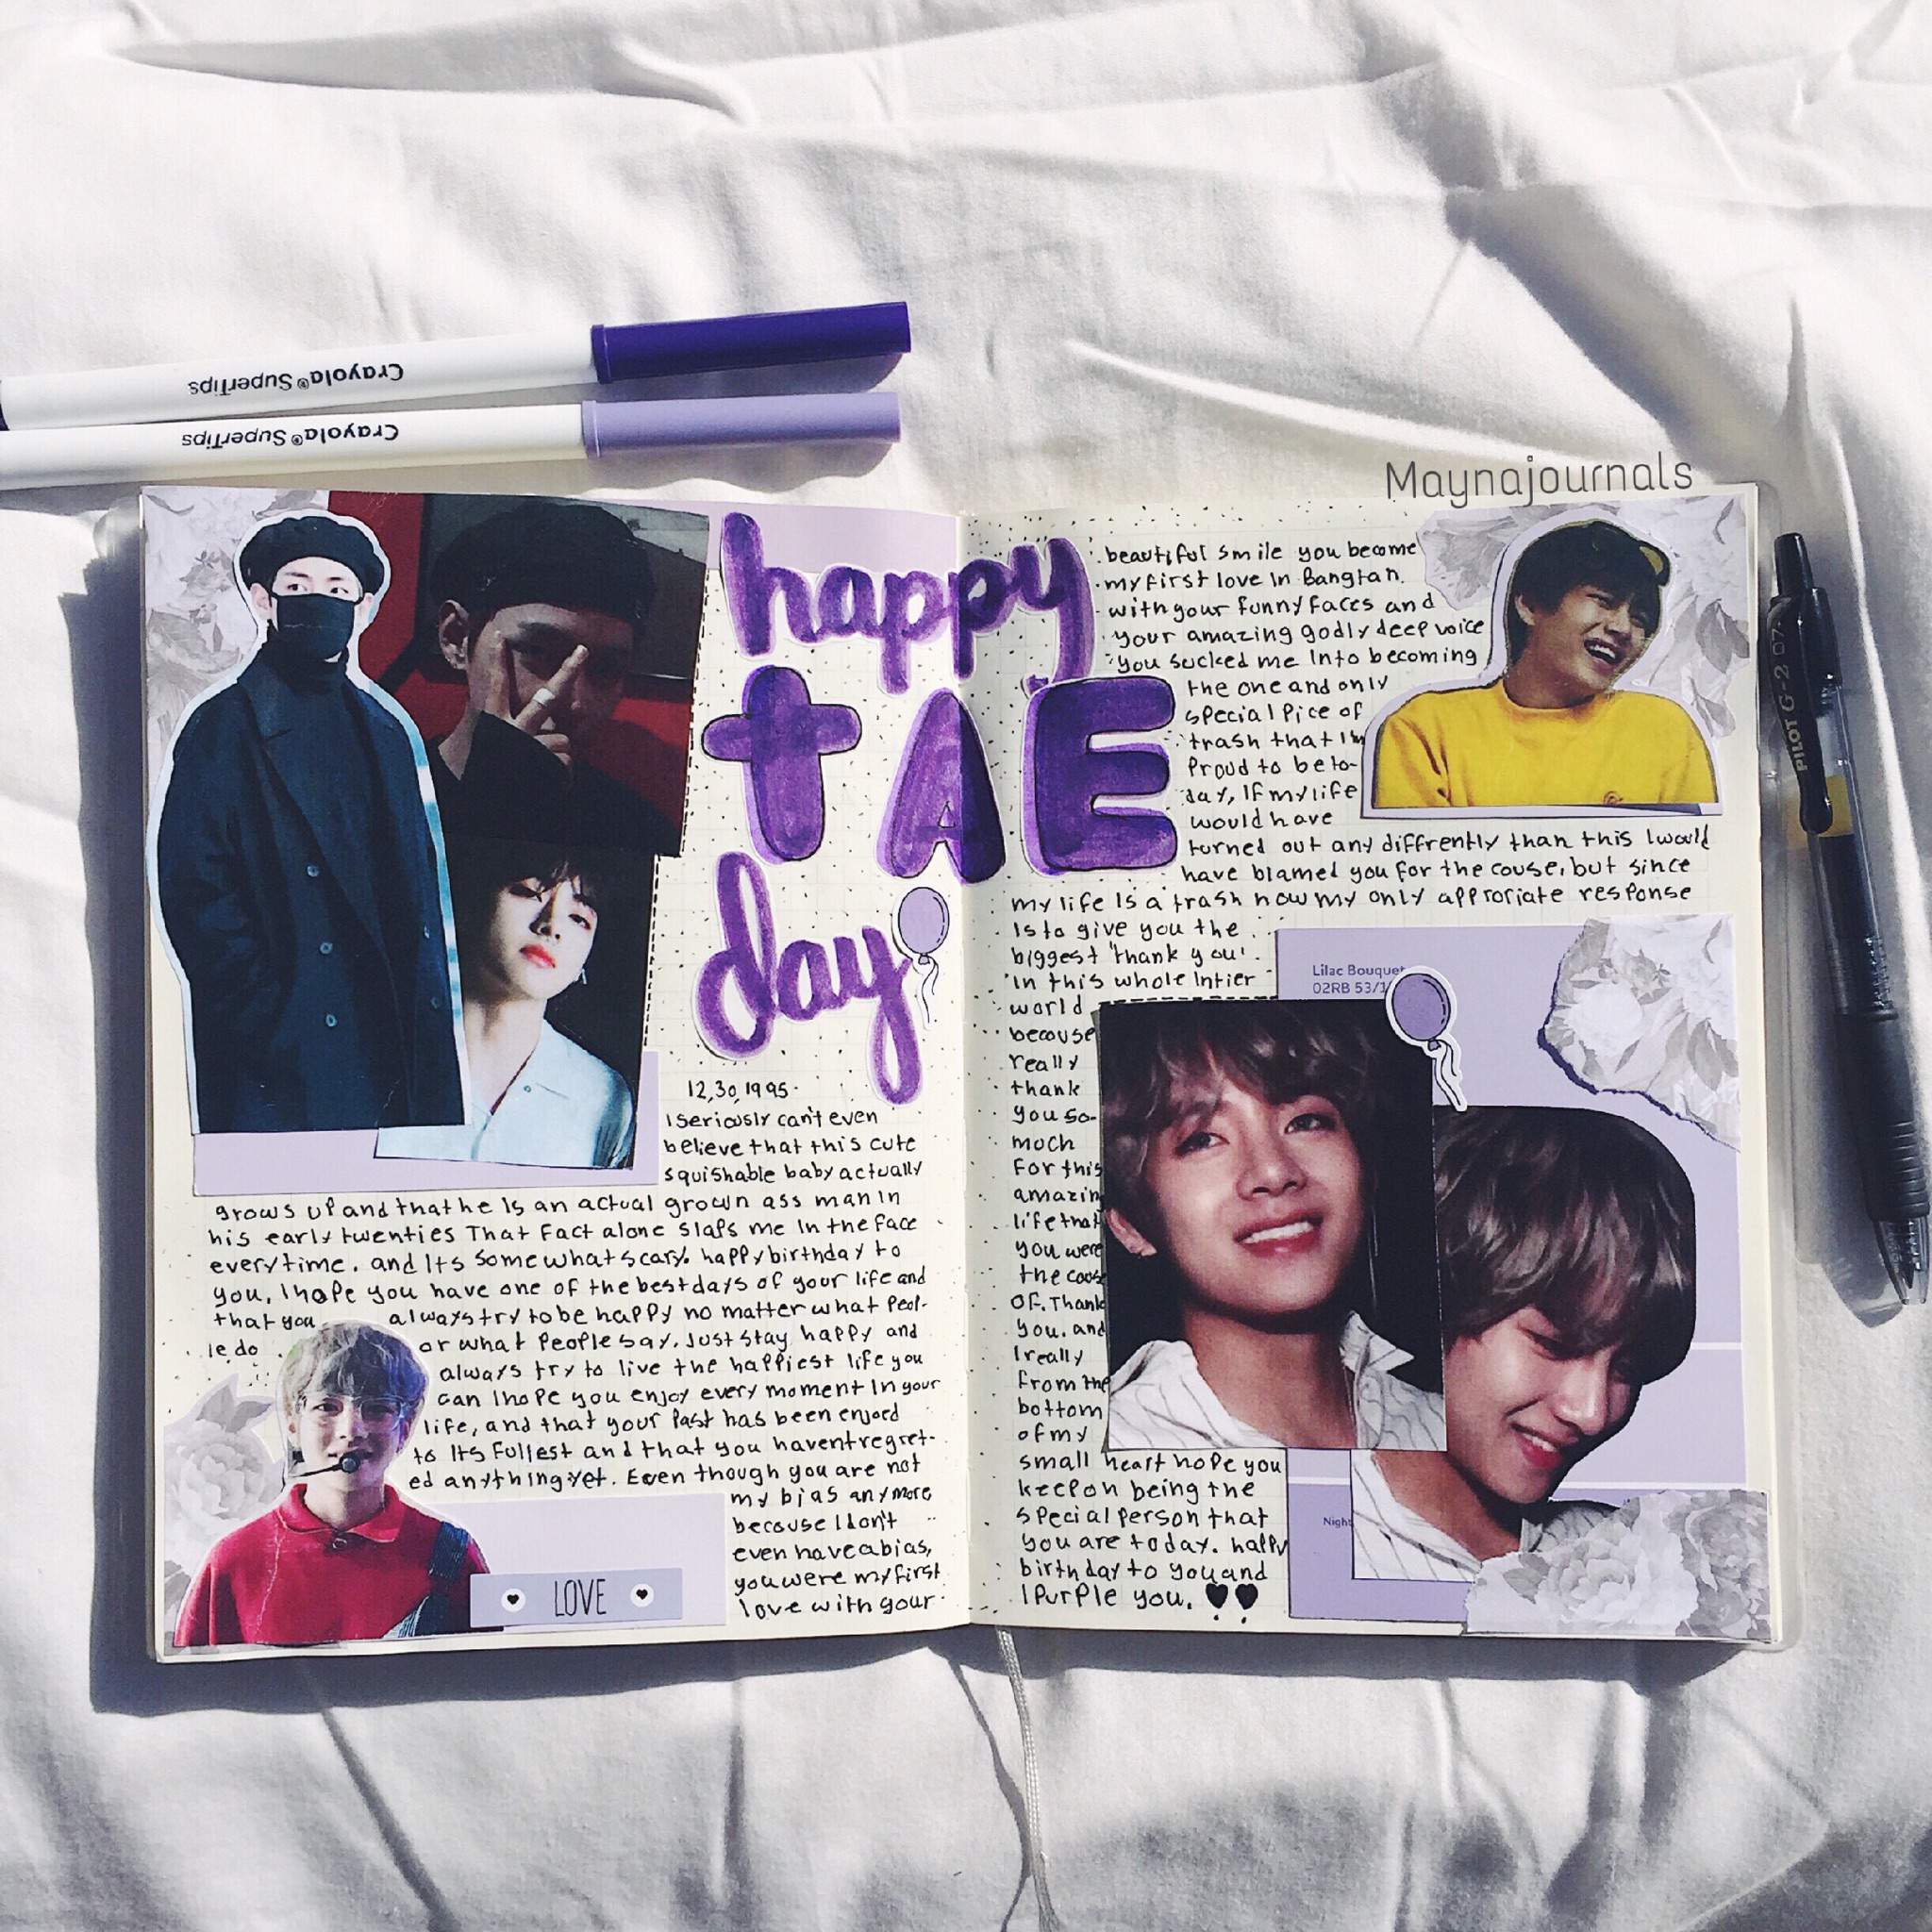 Happy taehyung day {journal spread} | ARMY's Amino